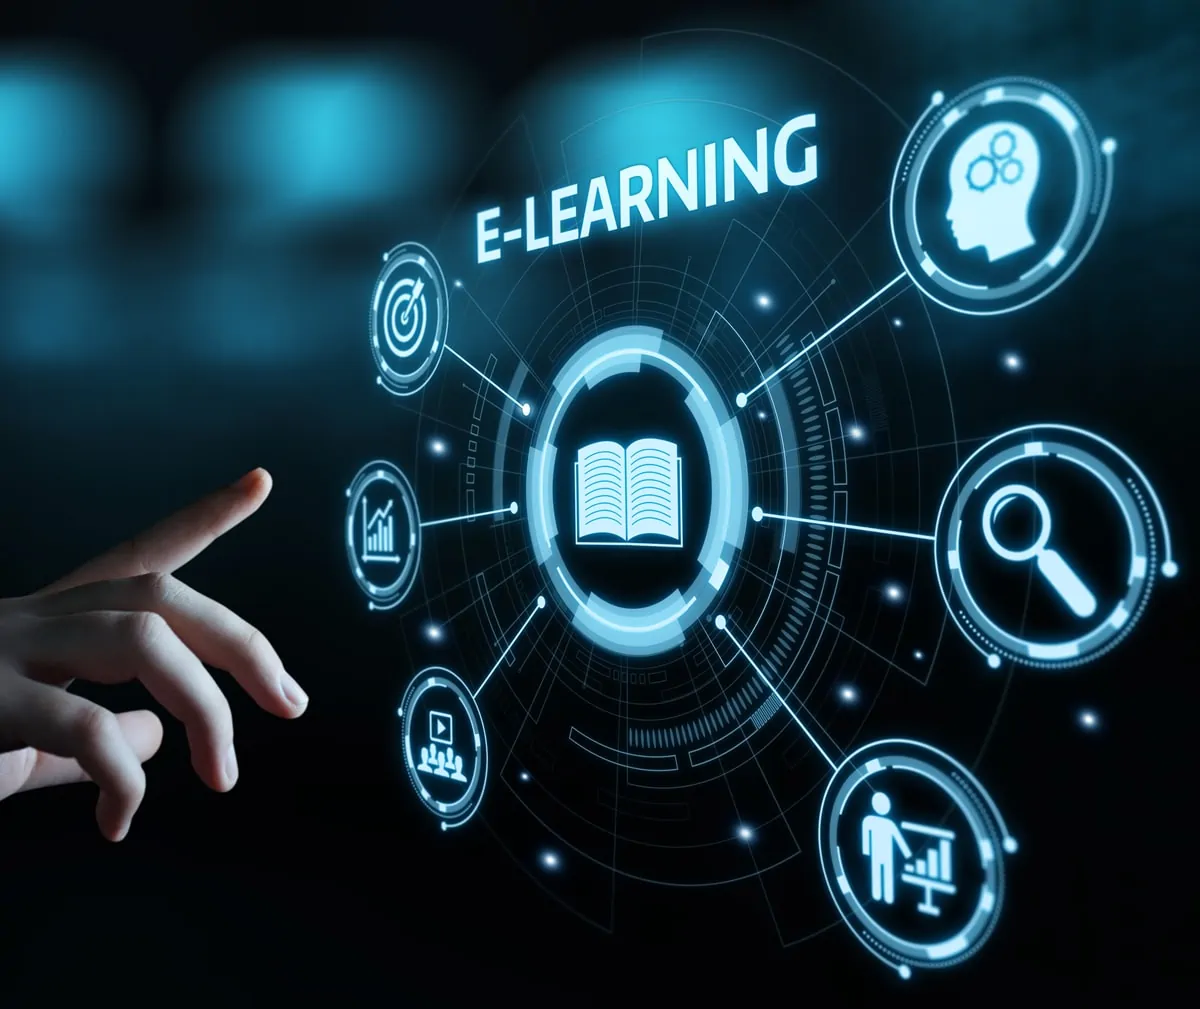 E-learning LMS